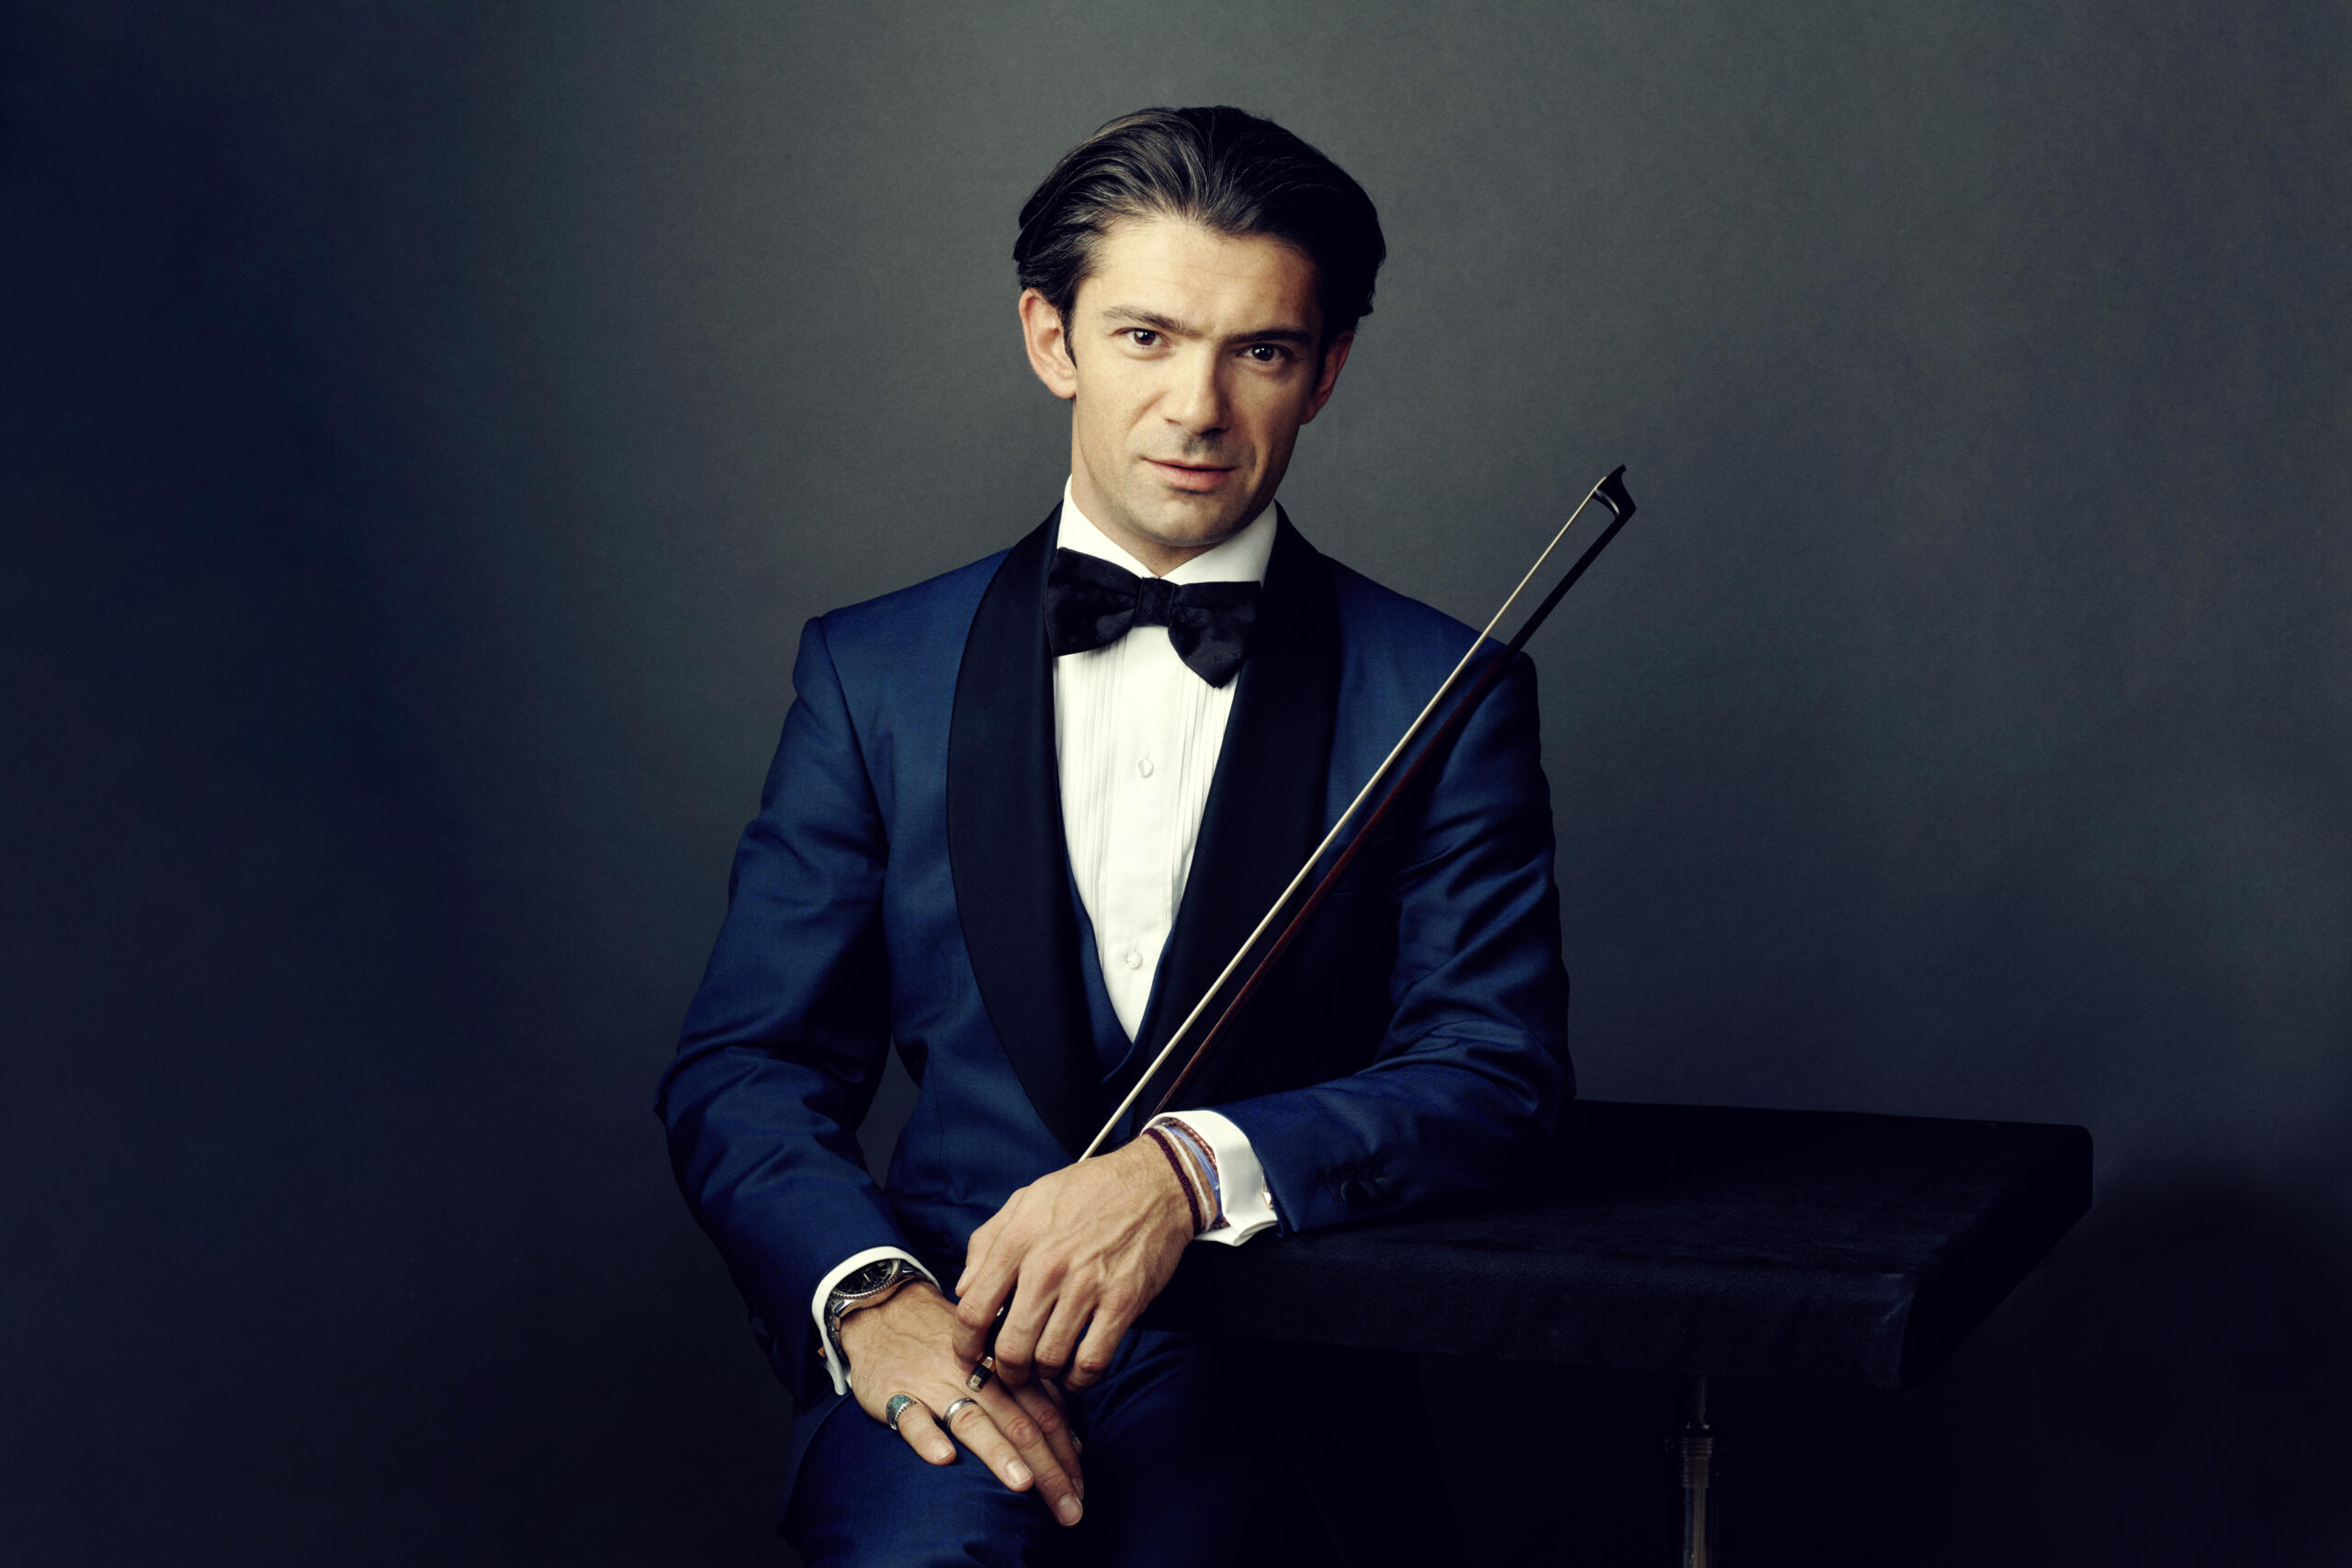 Portrait of the cellist Gautier Capuçon. He is wearing a blue jacket and is sitting in front of a grey wall. 